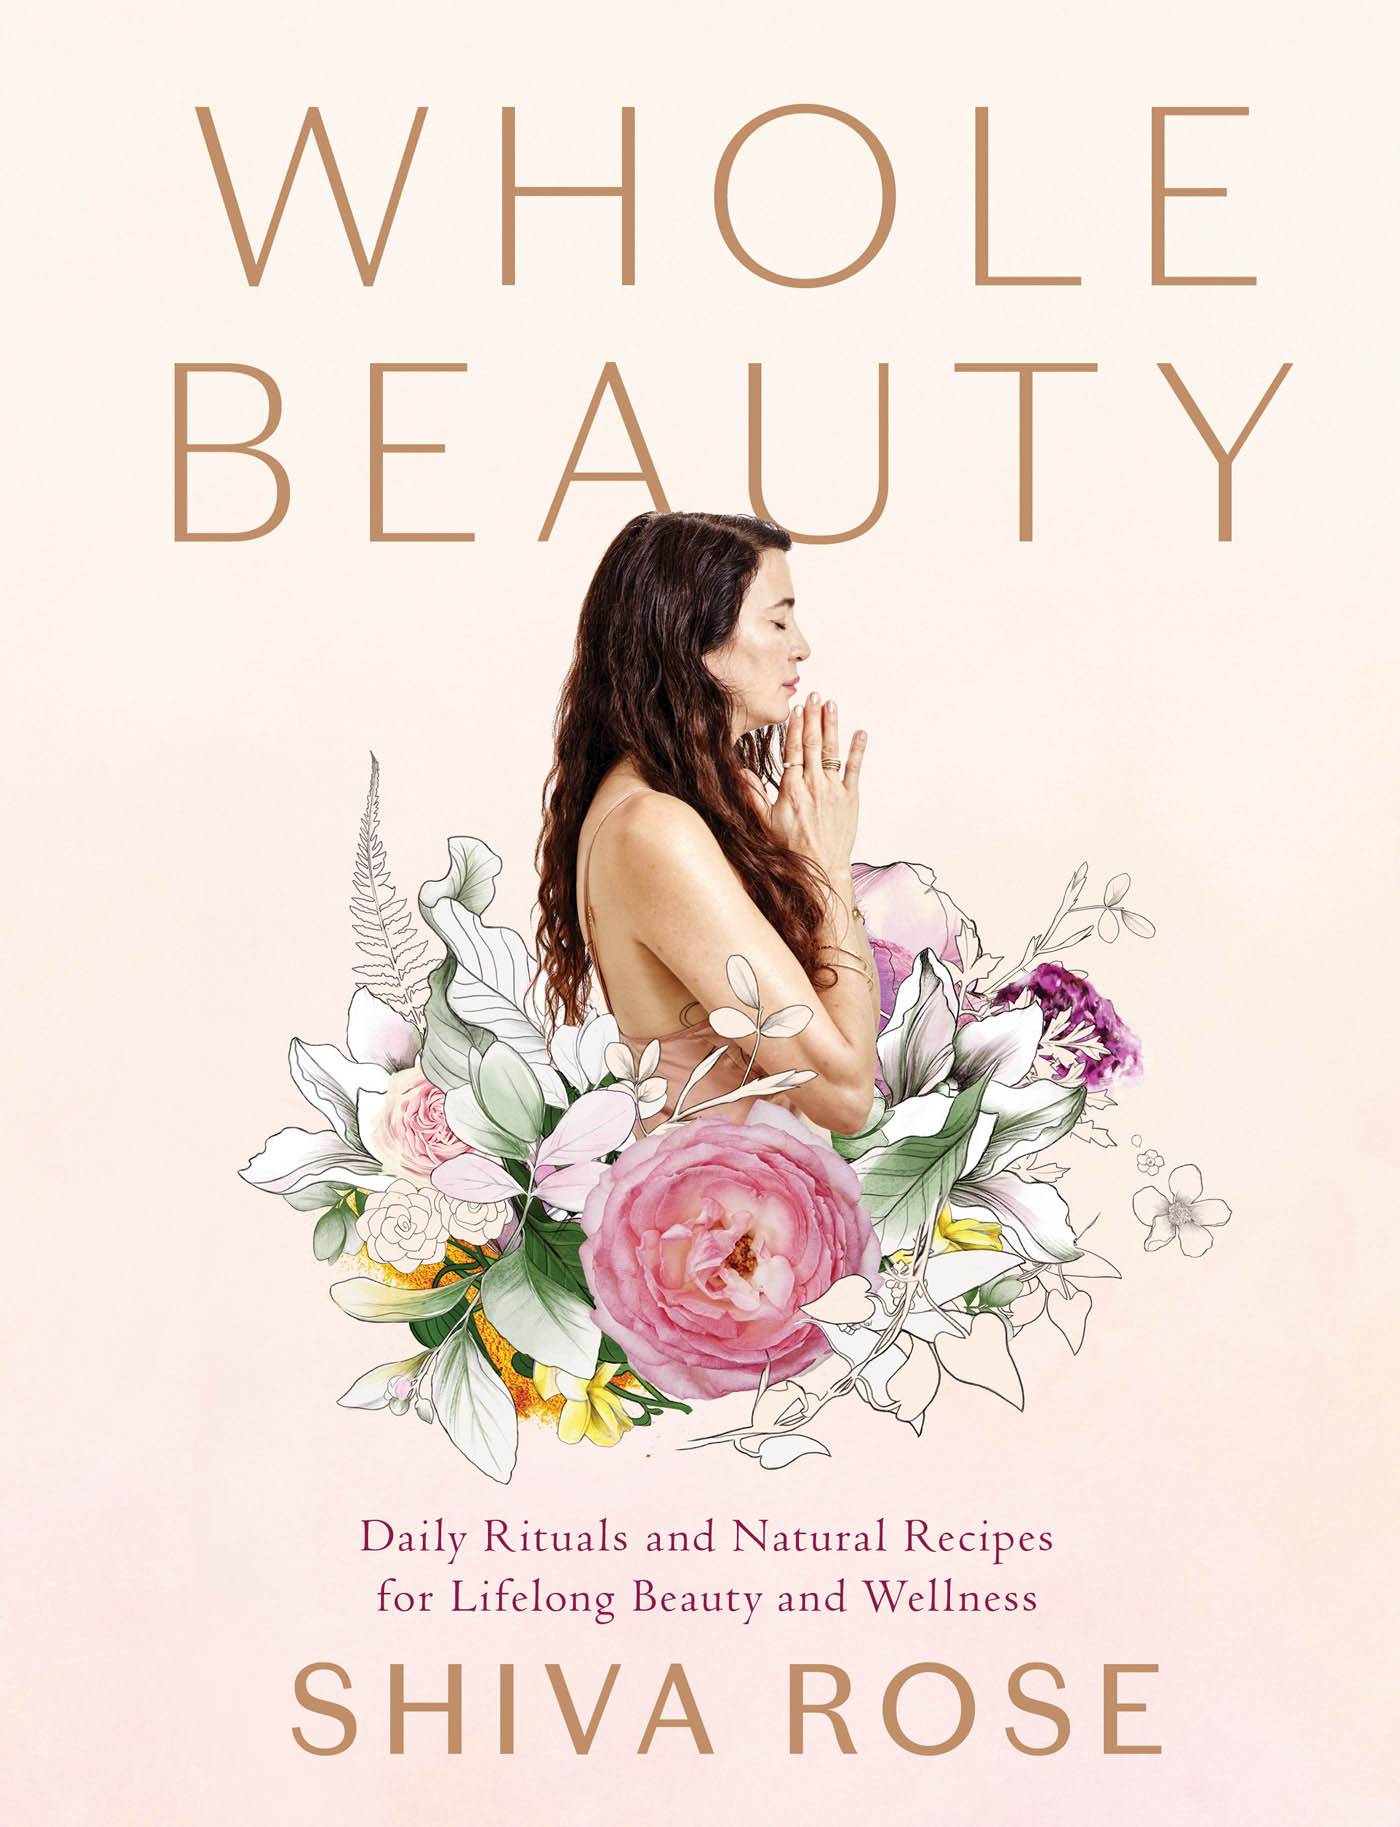 Whole Beauty Daily Rituals and Natural Recipes for Lifelong Beauty and Wellness - image 1